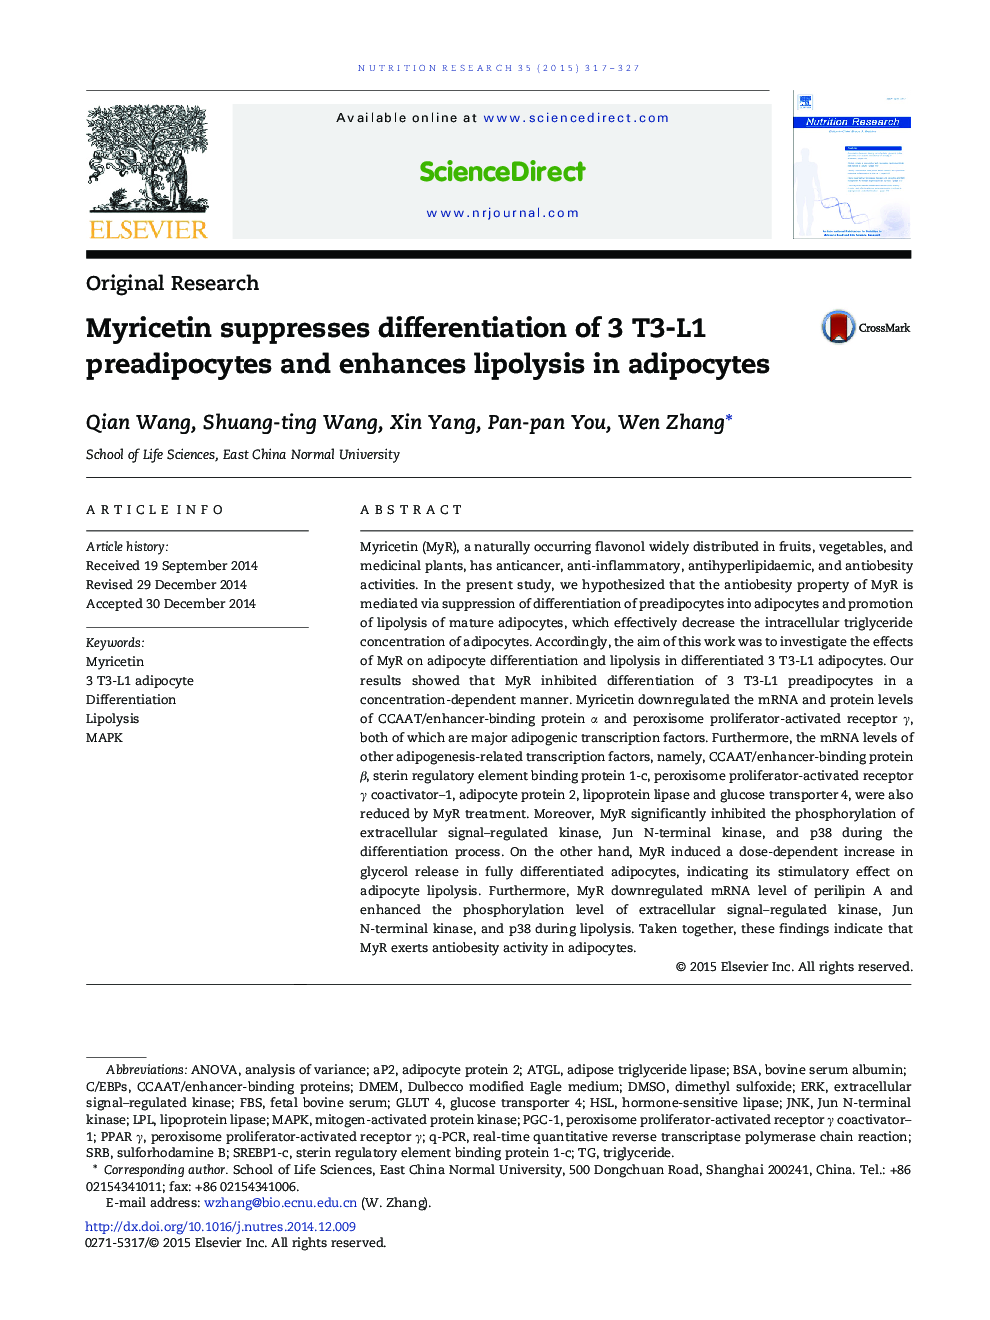 Myricetin suppresses differentiation of 3 T3-L1 preadipocytes and enhances lipolysis in adipocytes